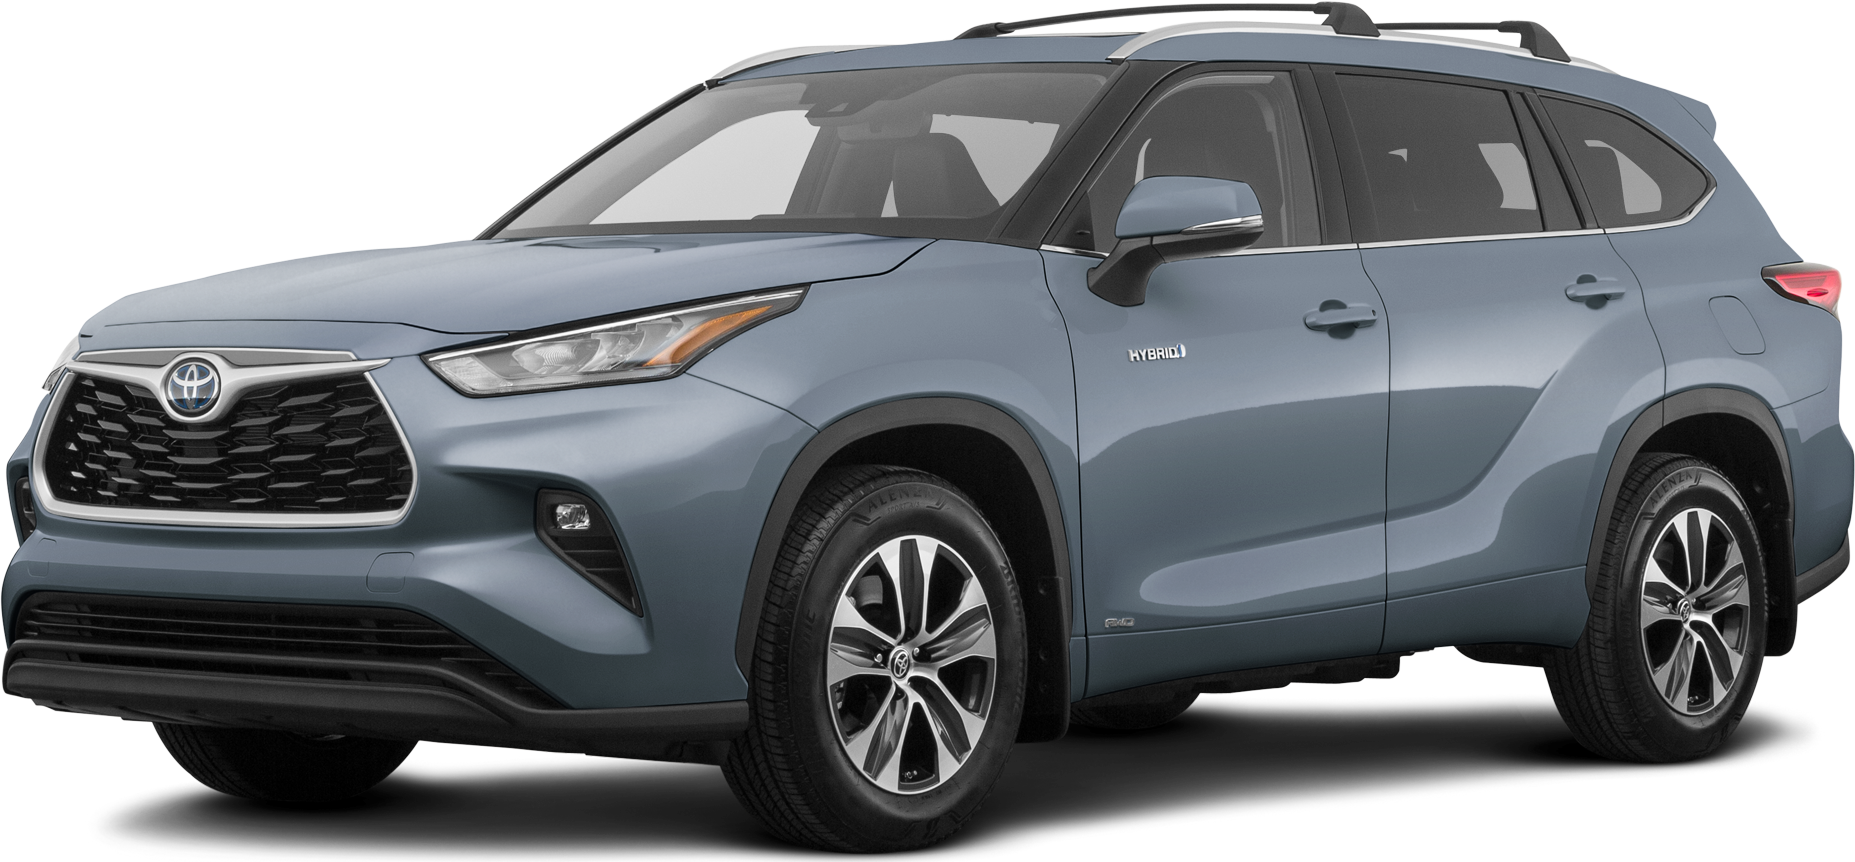 5 Toyota SUV Models To Consider Before Deciding On A Toyota New